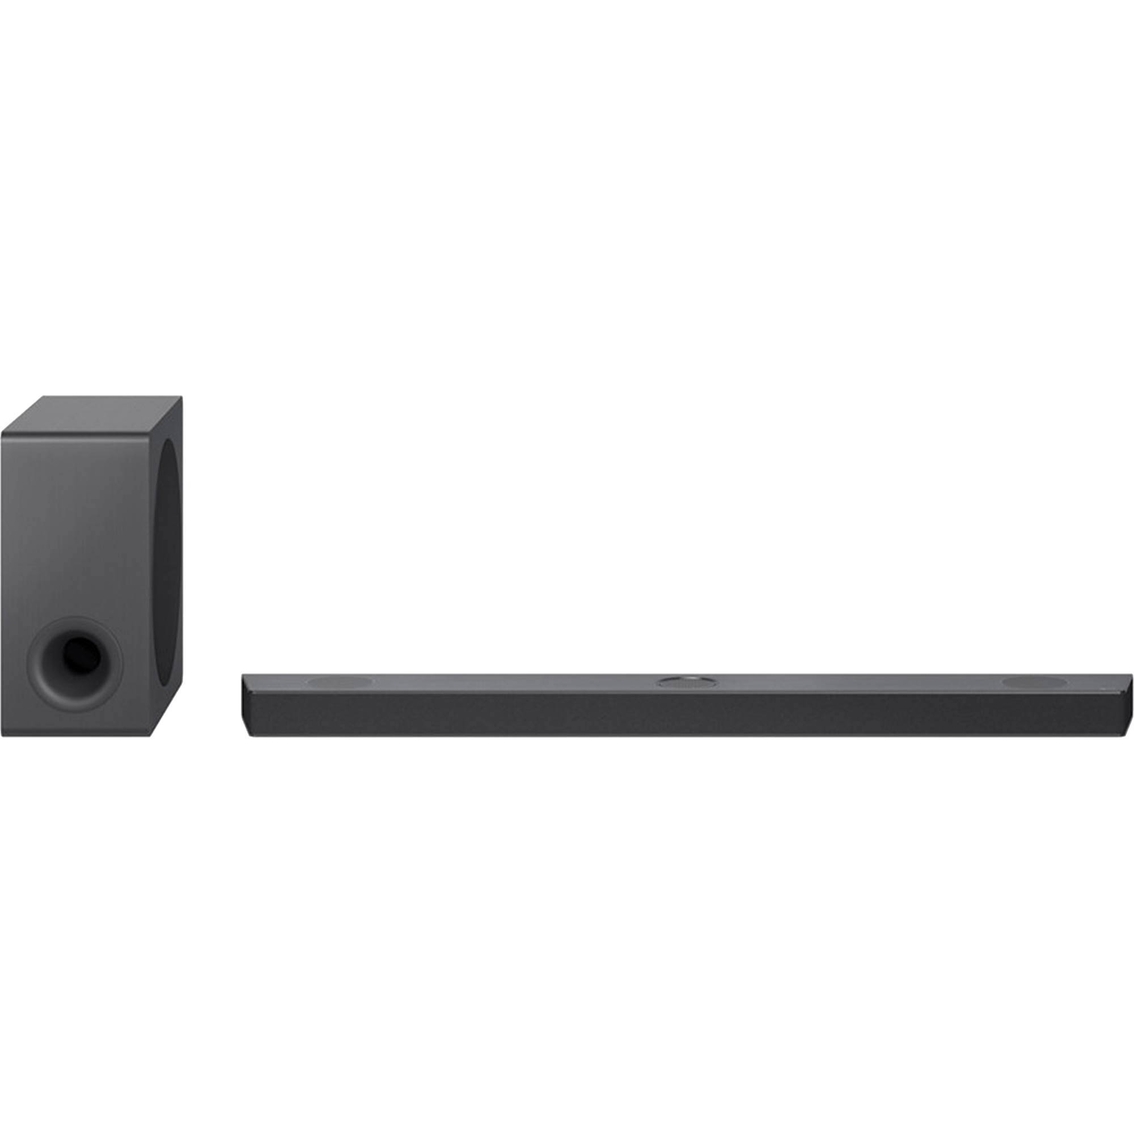 Military/Veterans: Save $500.99 on LG S90QY 5.1.3 Channel 570W High Res Sound Bar with Dolby Atmos and Apple Airplay 2 $699